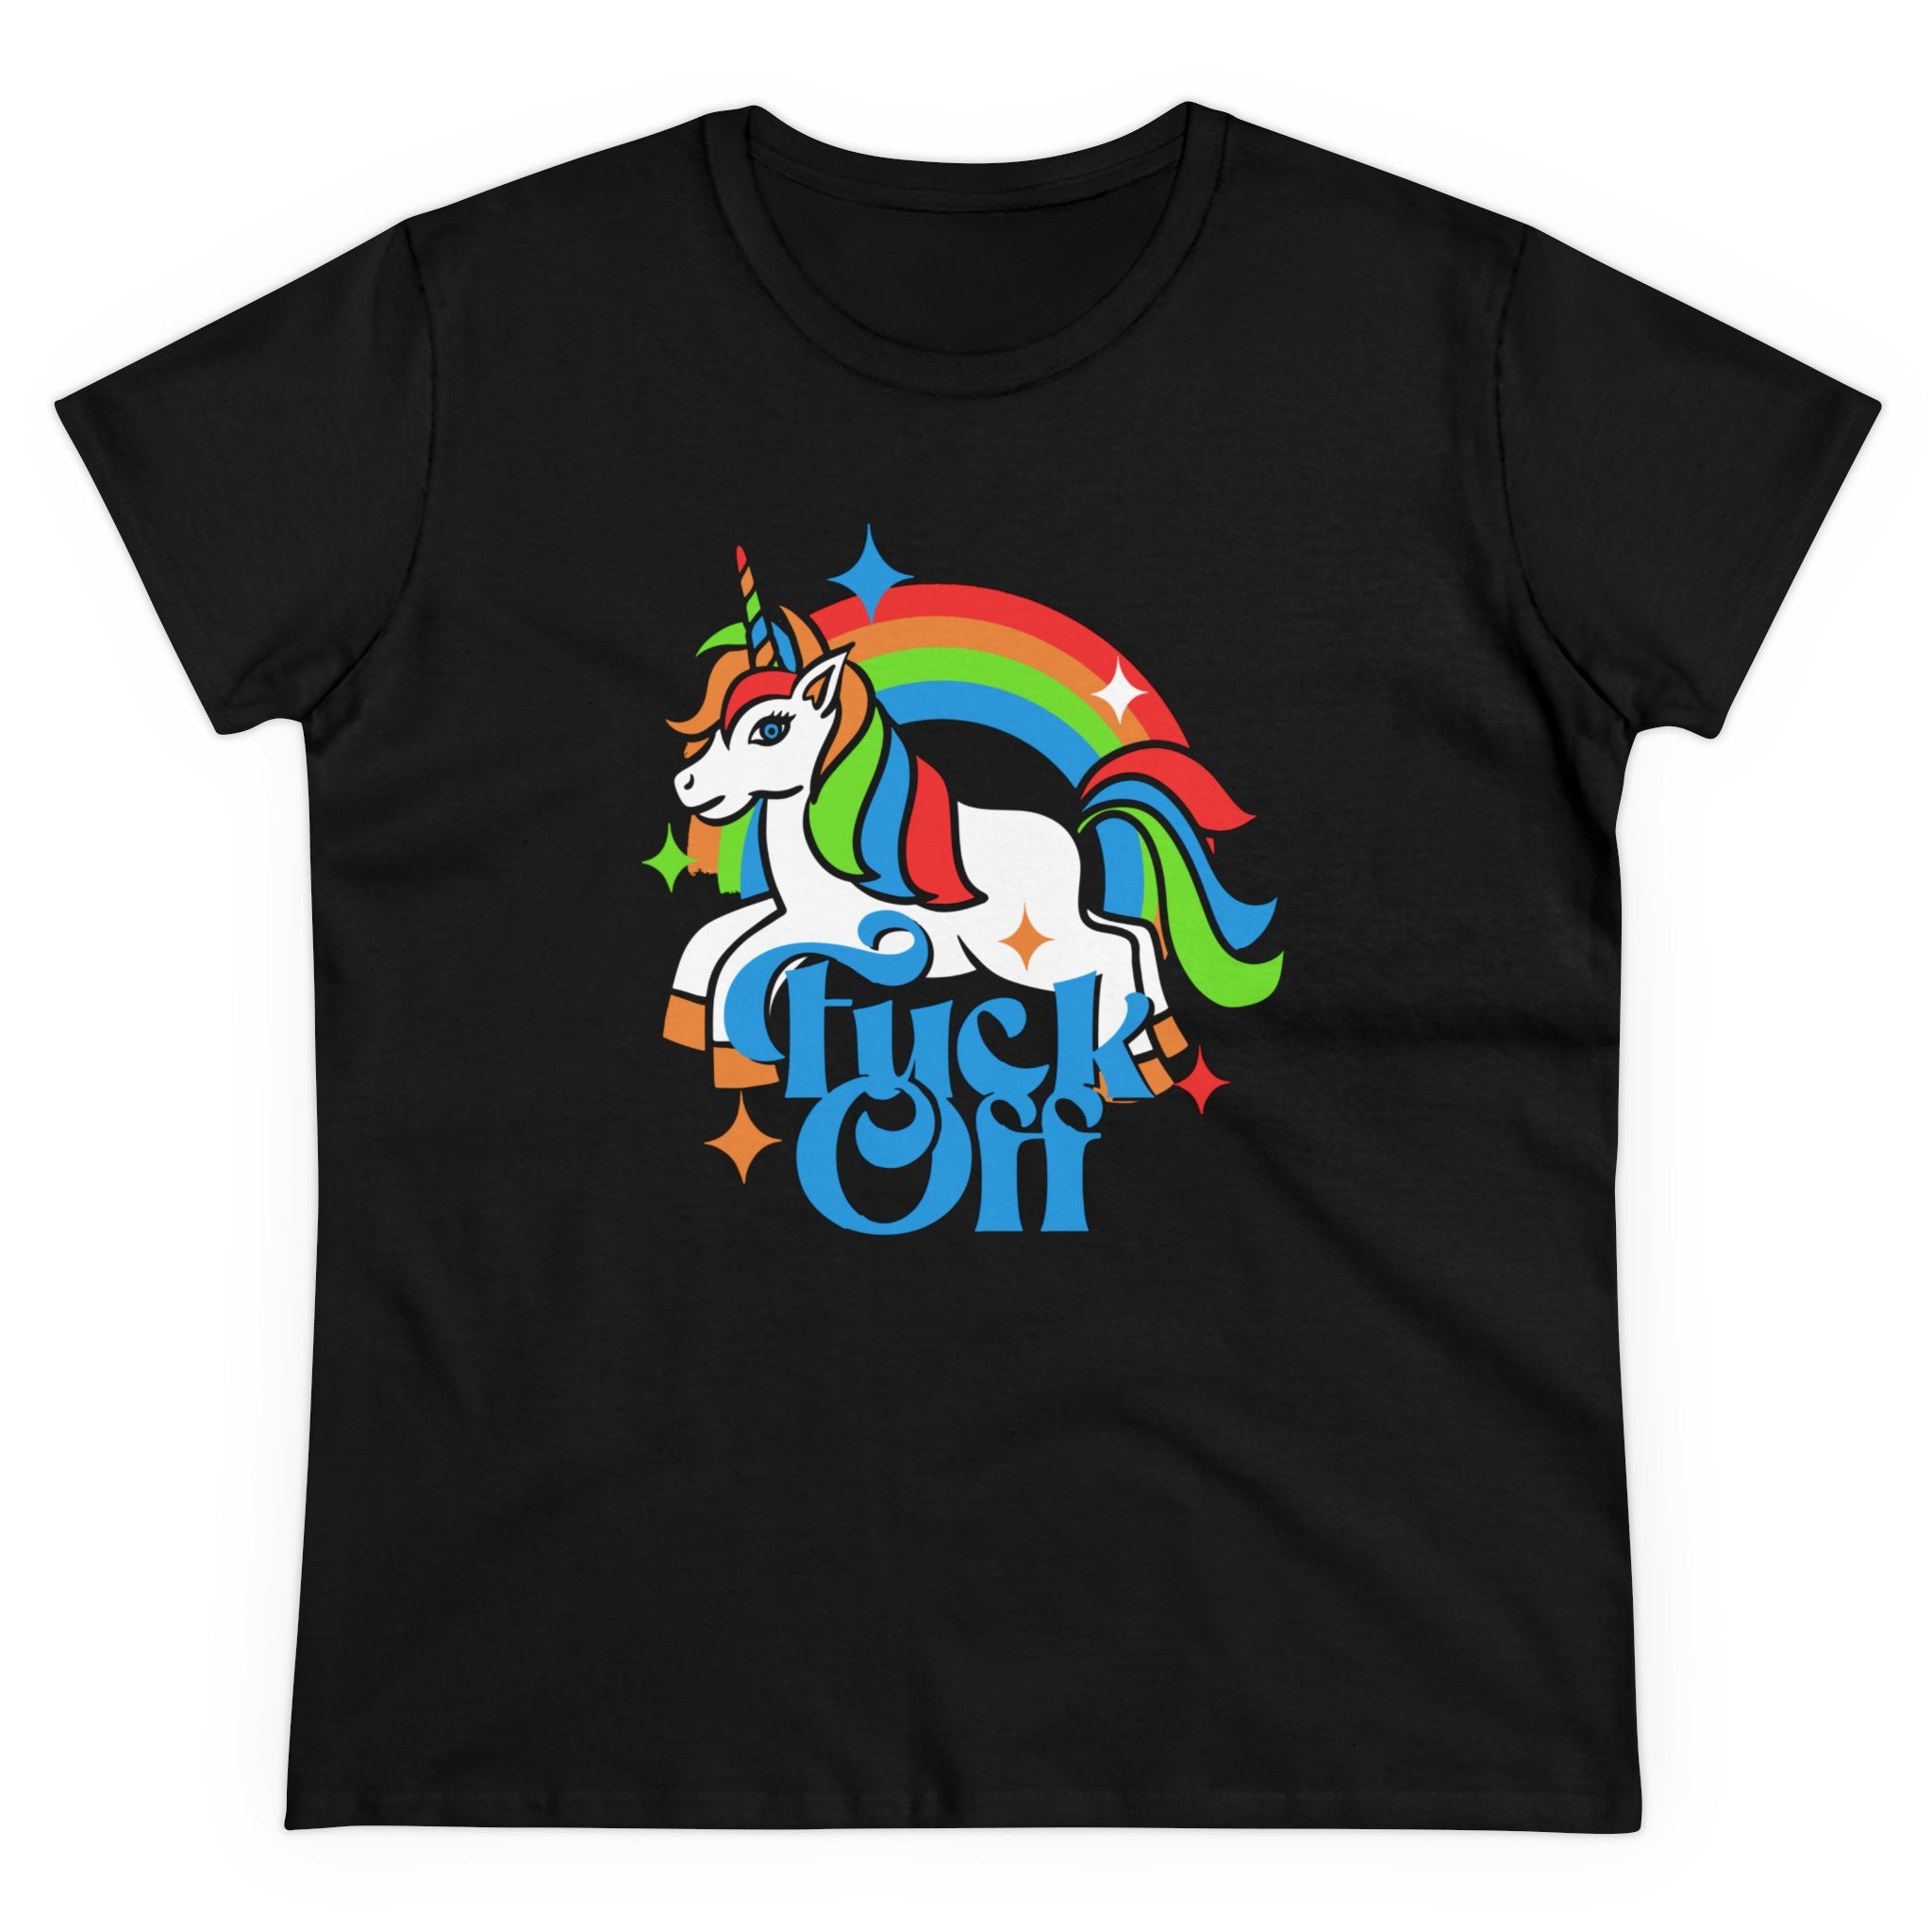 F Off - Women's Tee featuring a colorful unicorn with a rainbow mane and tail, and the text "Fuck Off" in blue lettering below the unicorn. Crafted from lightweight cotton, this bold design is sure to make a statement.